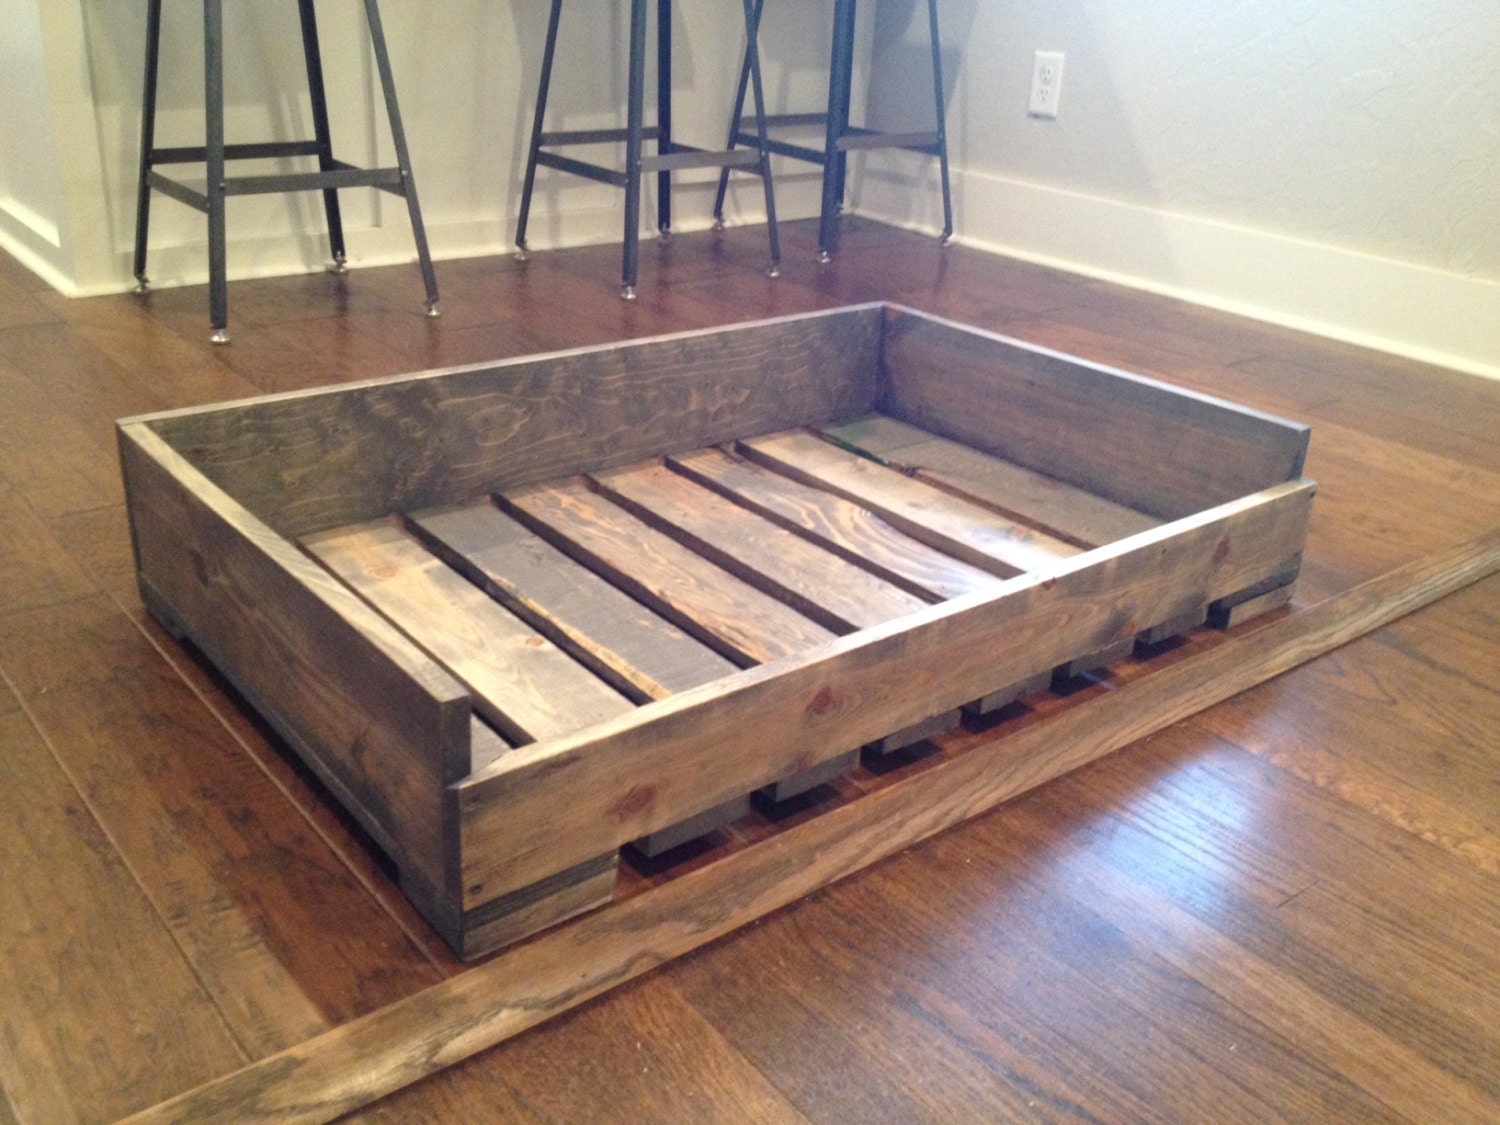  to Handmade, custom, "pallet style" solid wood dog beds on Etsy